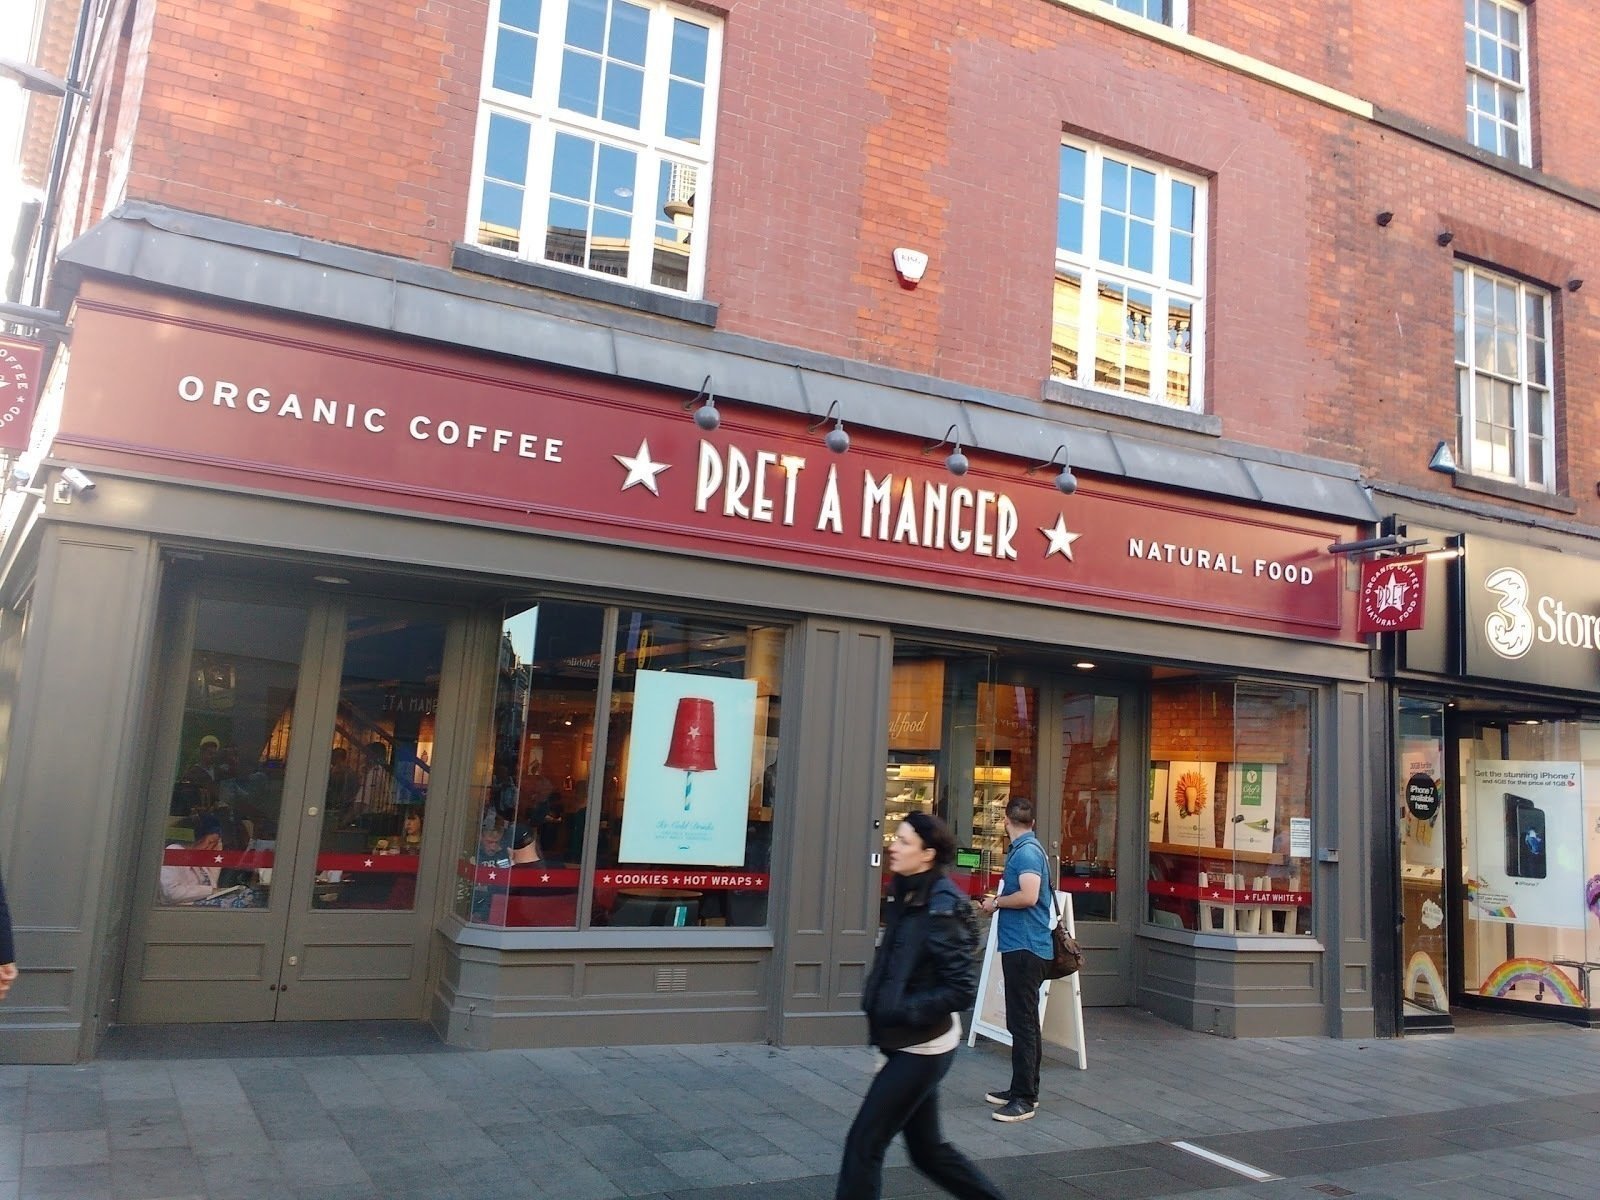 <span class="translation_missing" title="translation missing: en.meta.location_title, location_name: Pret A Manger, city: London">Location Title</span>